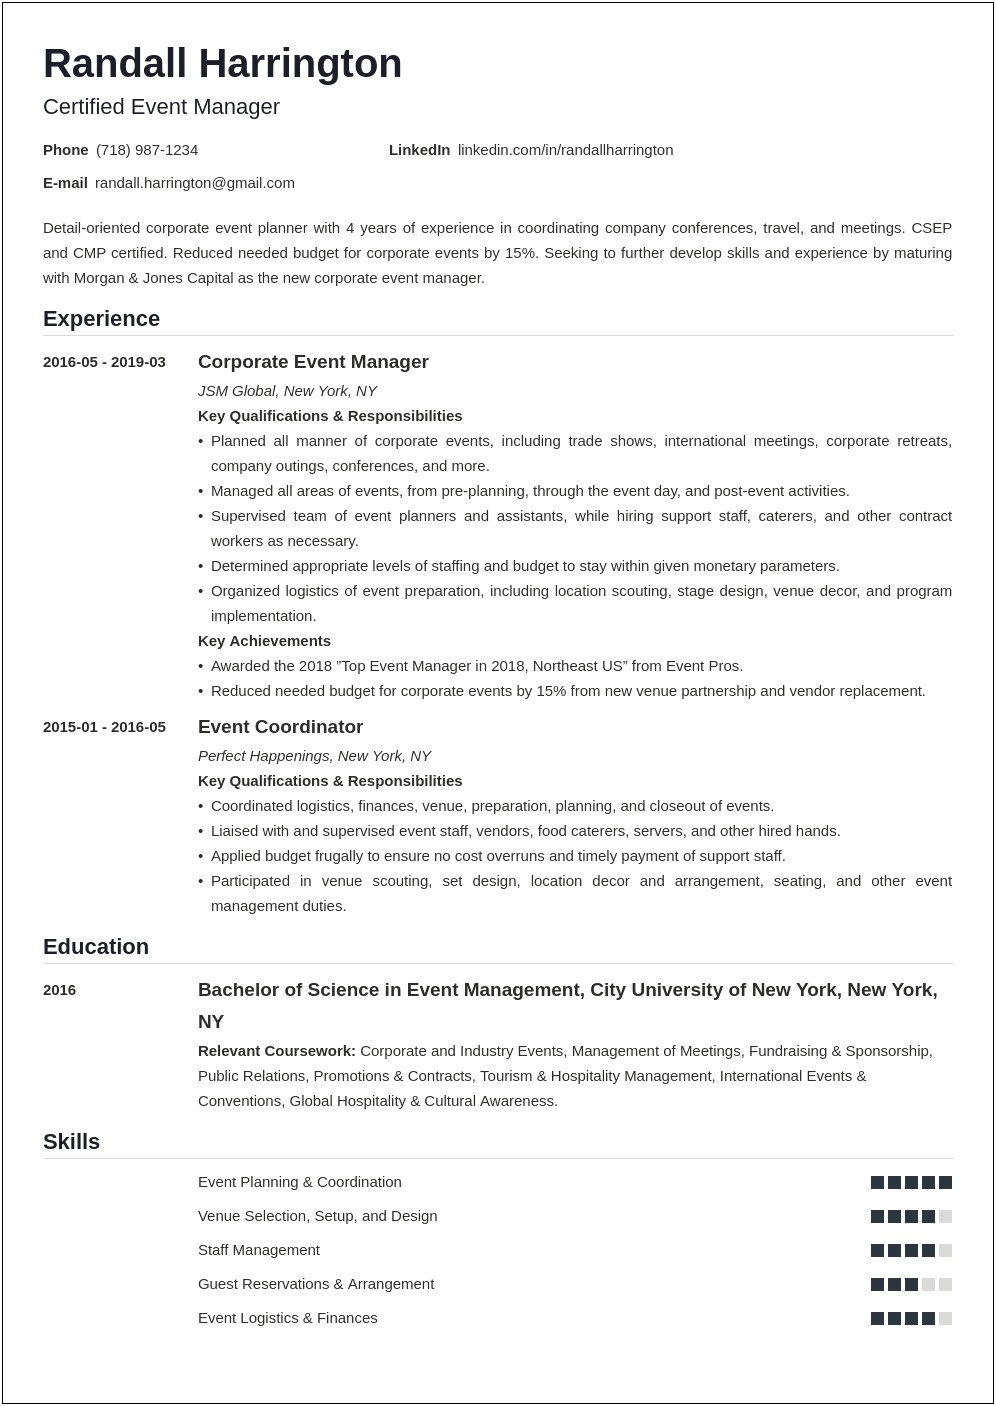 Resume Objective For Event Director